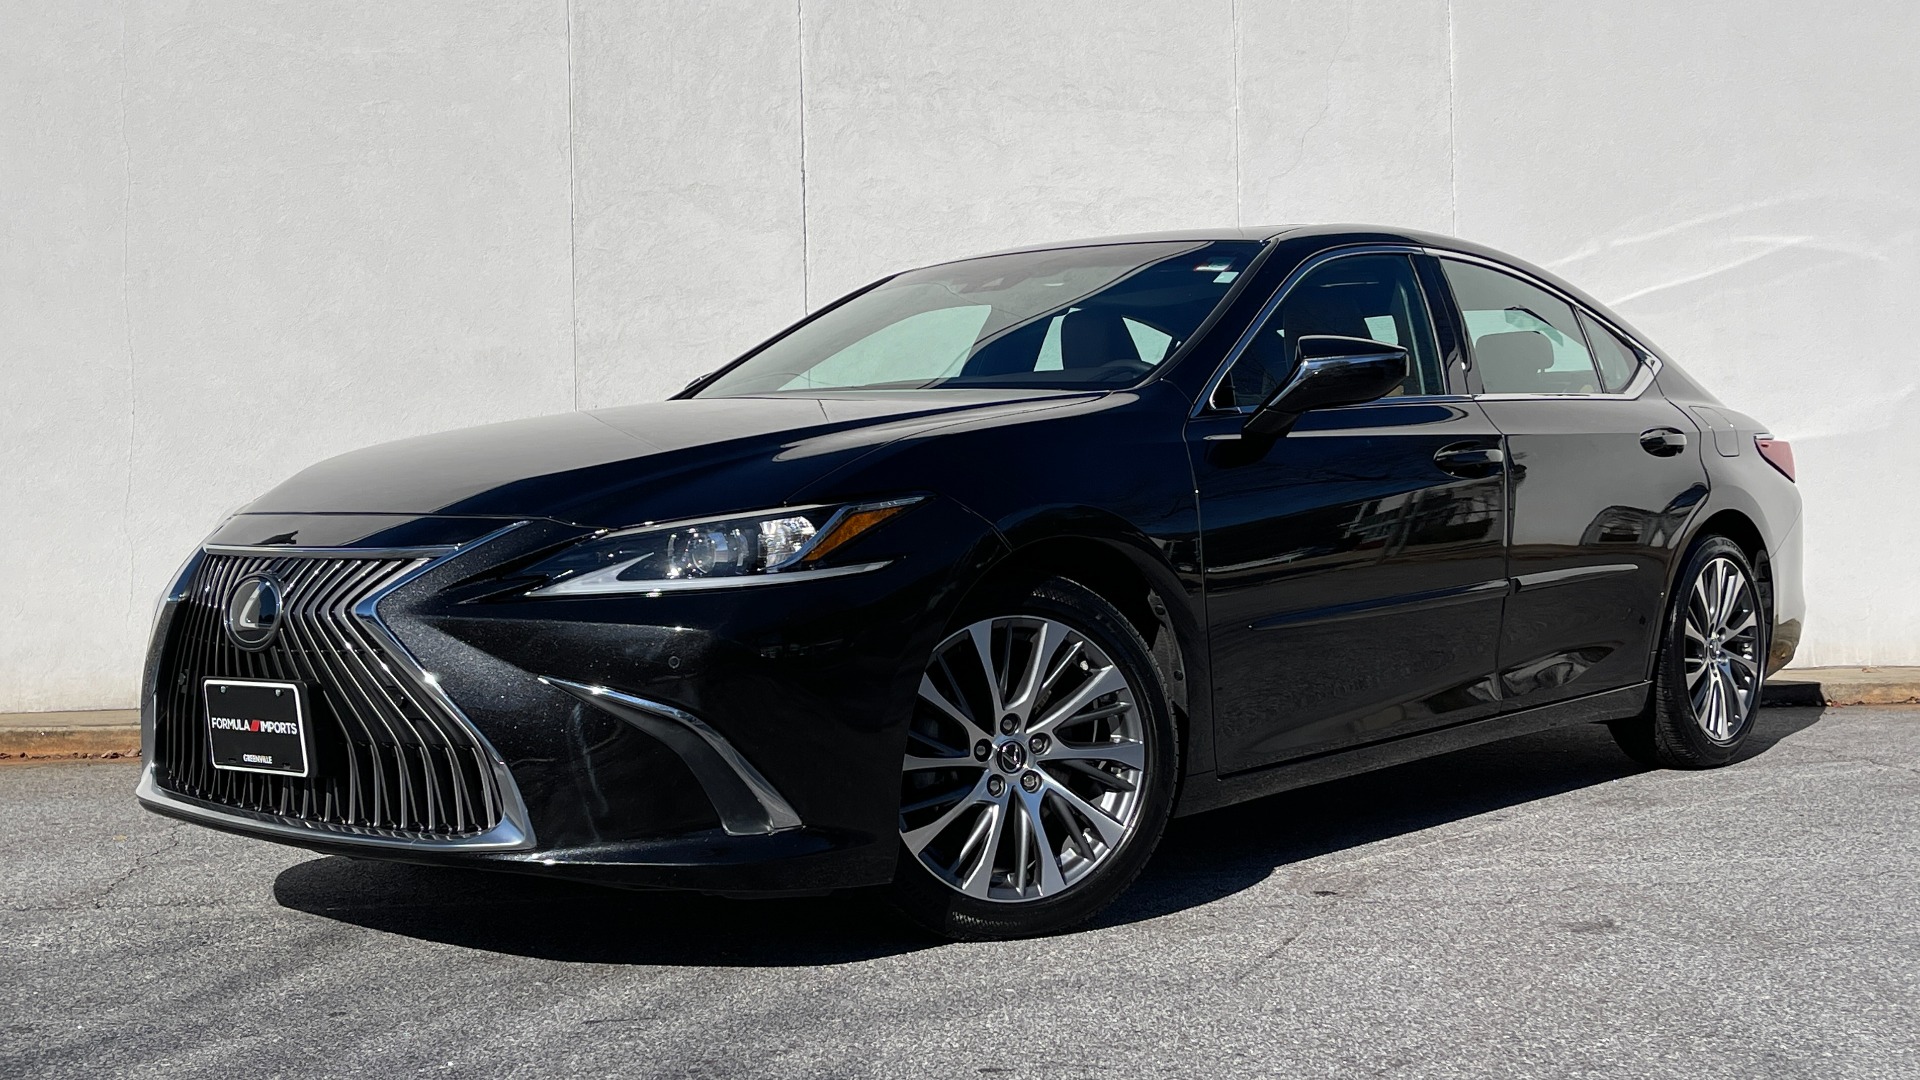 Used 2020 Lexus ES 350 PREMIUM 3.5L SEDAN / BSM / MEMORY / SUNROOF / HTD STS / REARVIEW for sale $44,895 at Formula Imports in Charlotte NC 28227 1